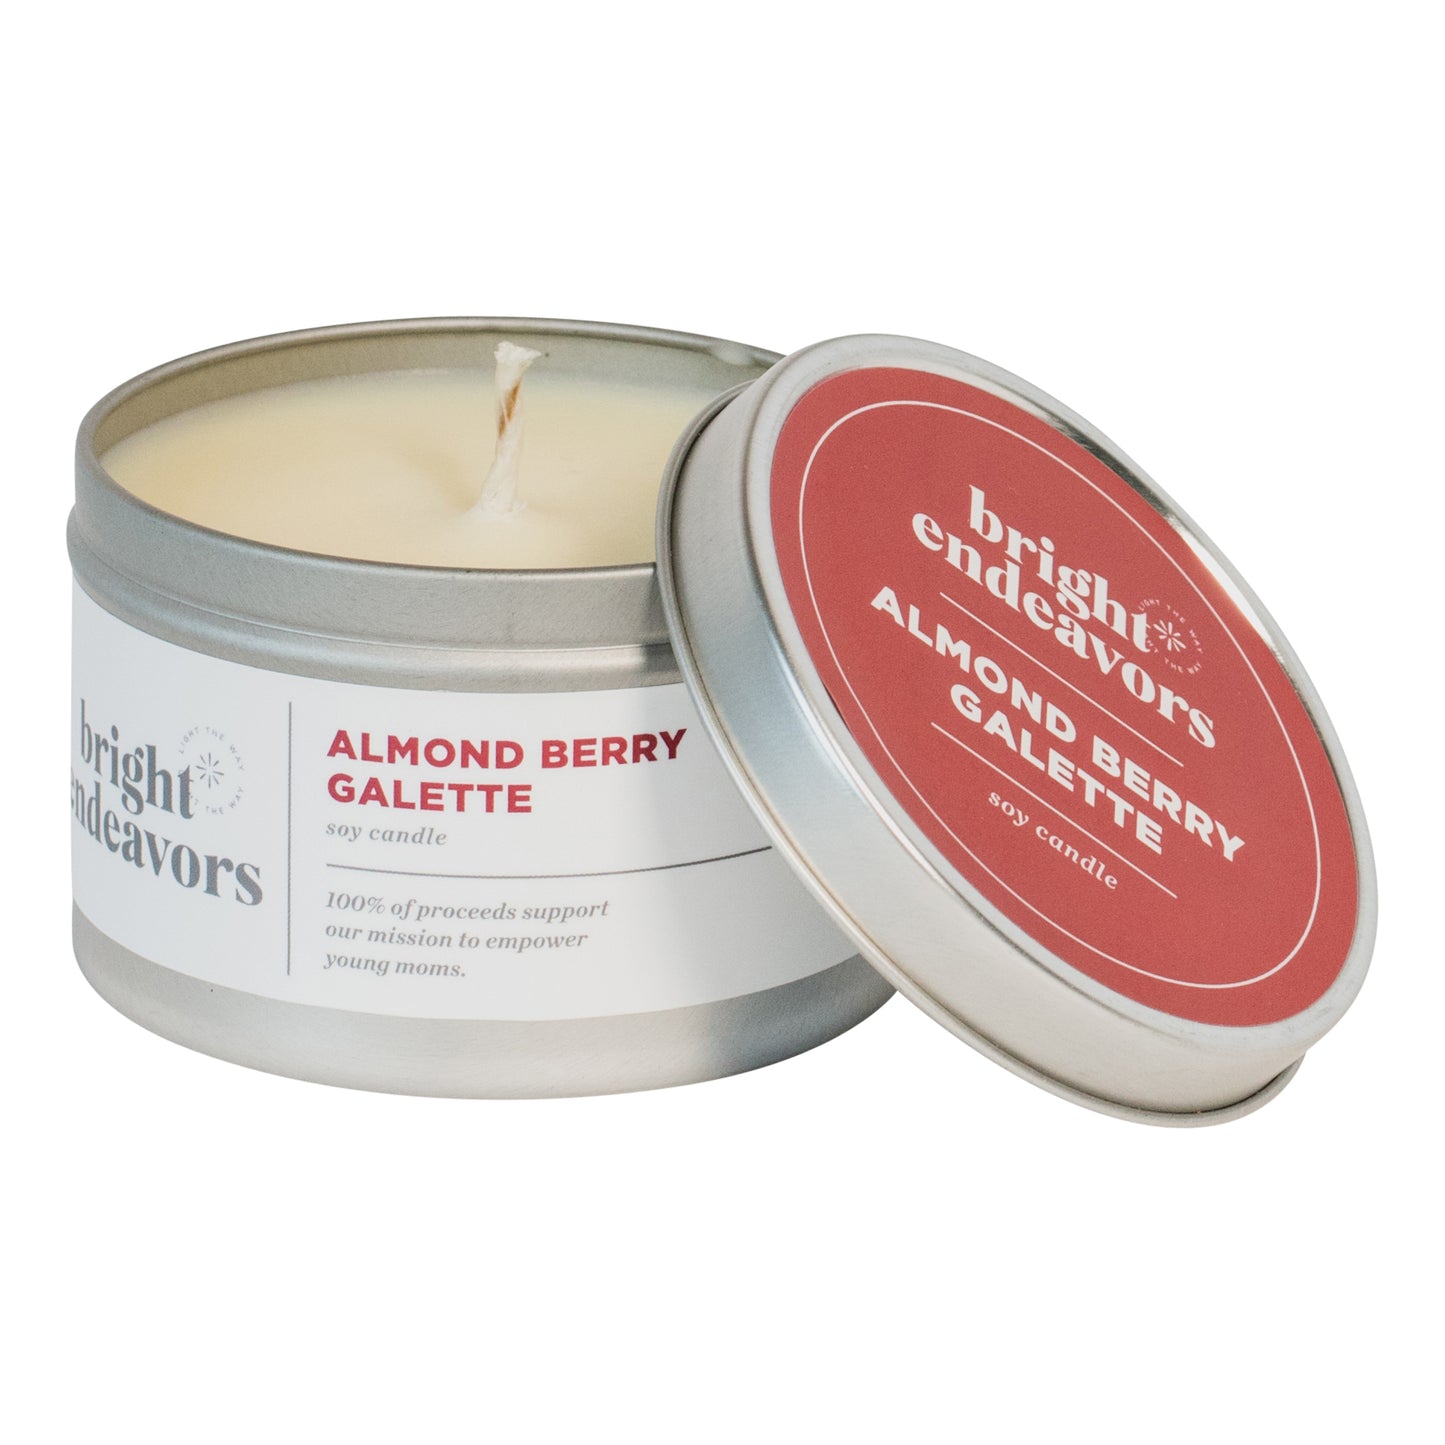 Almond Berry Galette Candle, 8oz.